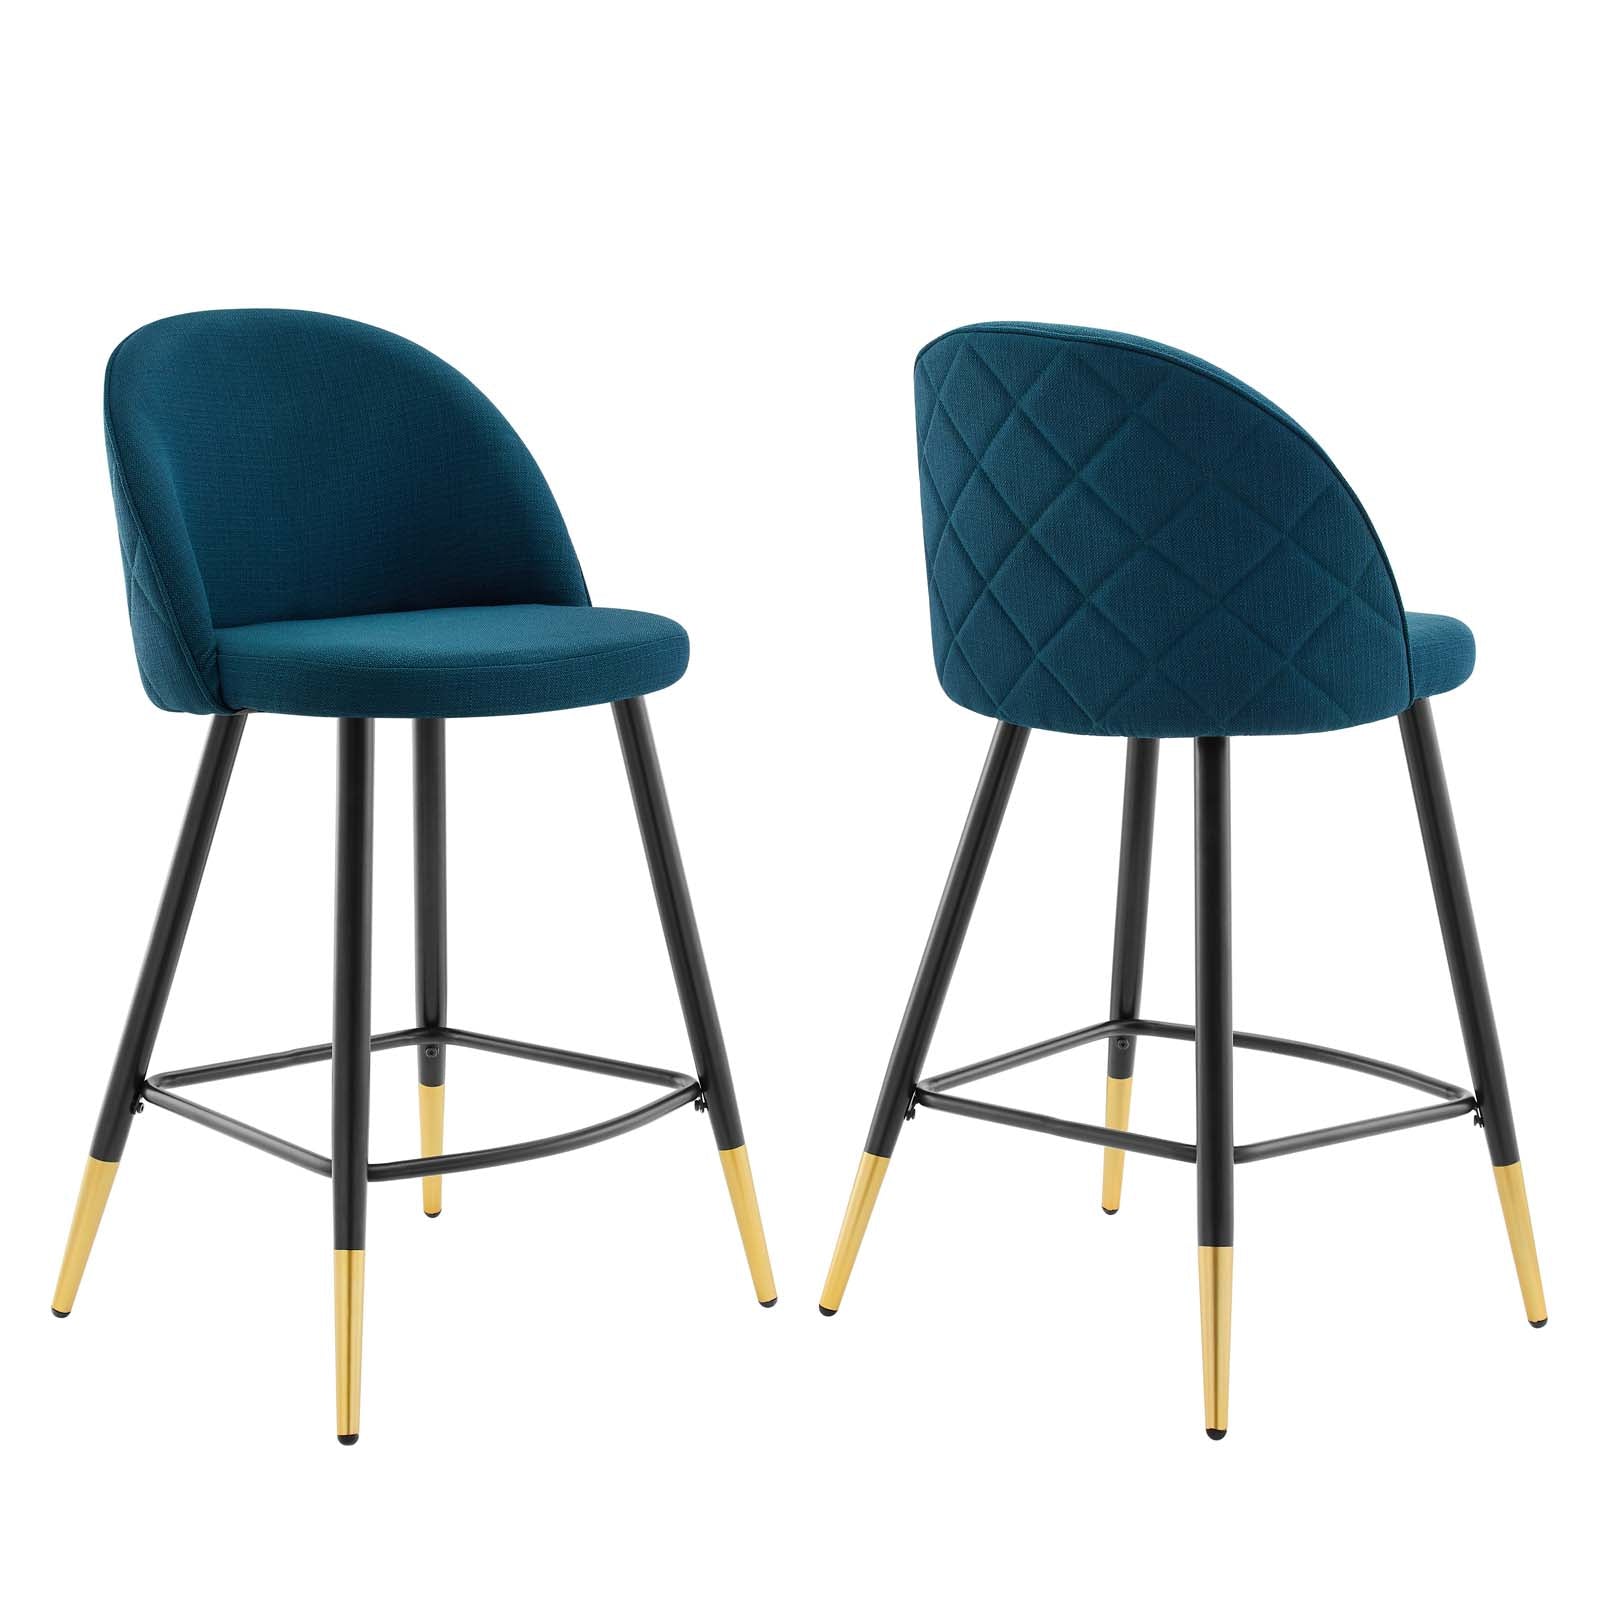 Modway Barstools - Cordial Fabric Counter Stools - Set of 2 Azure